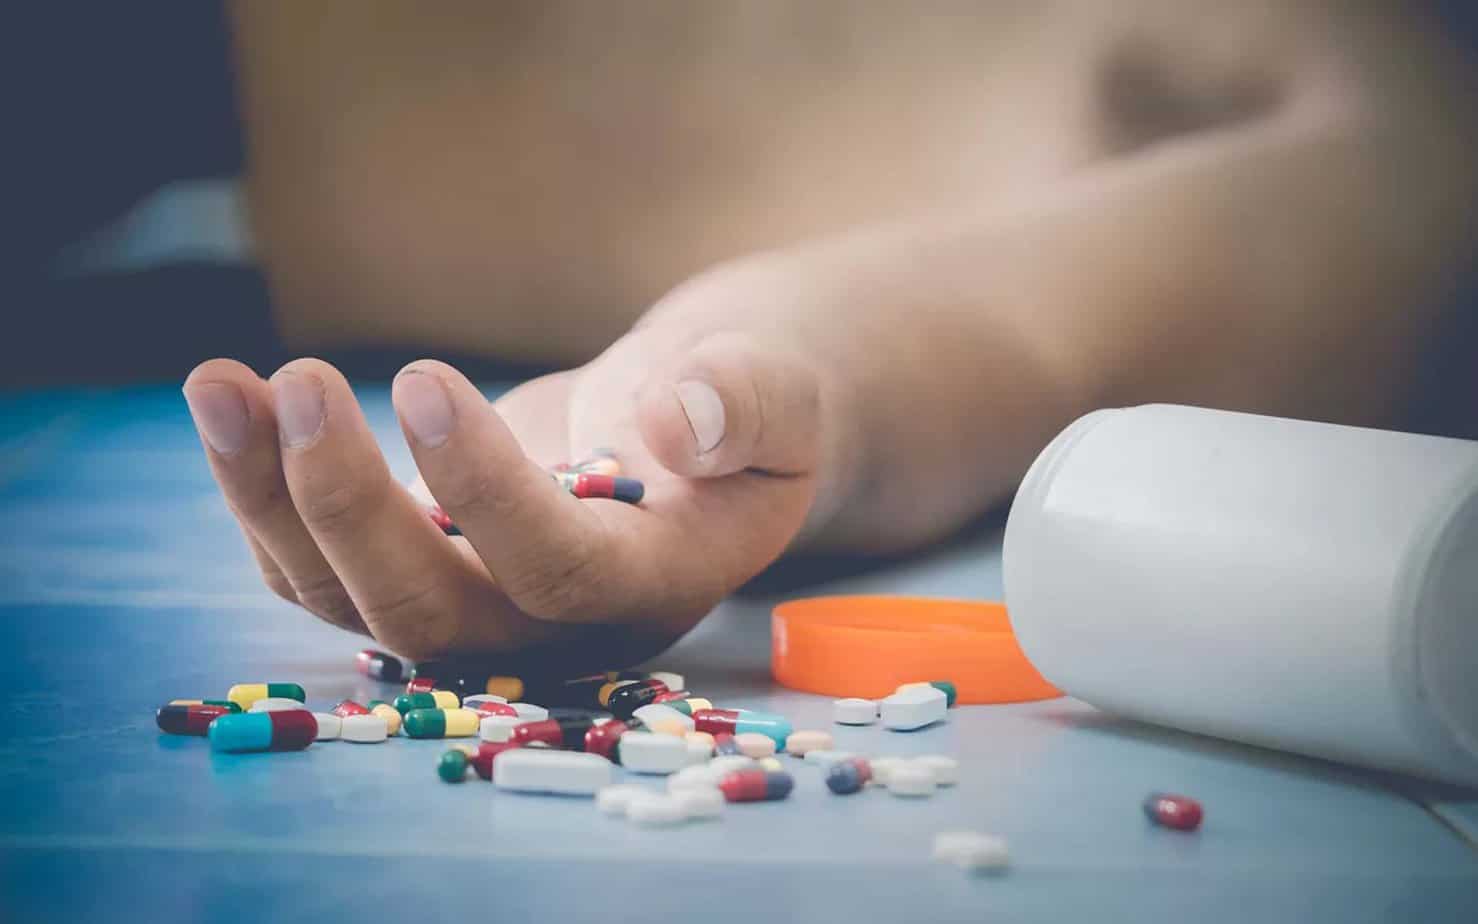 Overdose Deaths In U.S. Drop By 5% In 2018